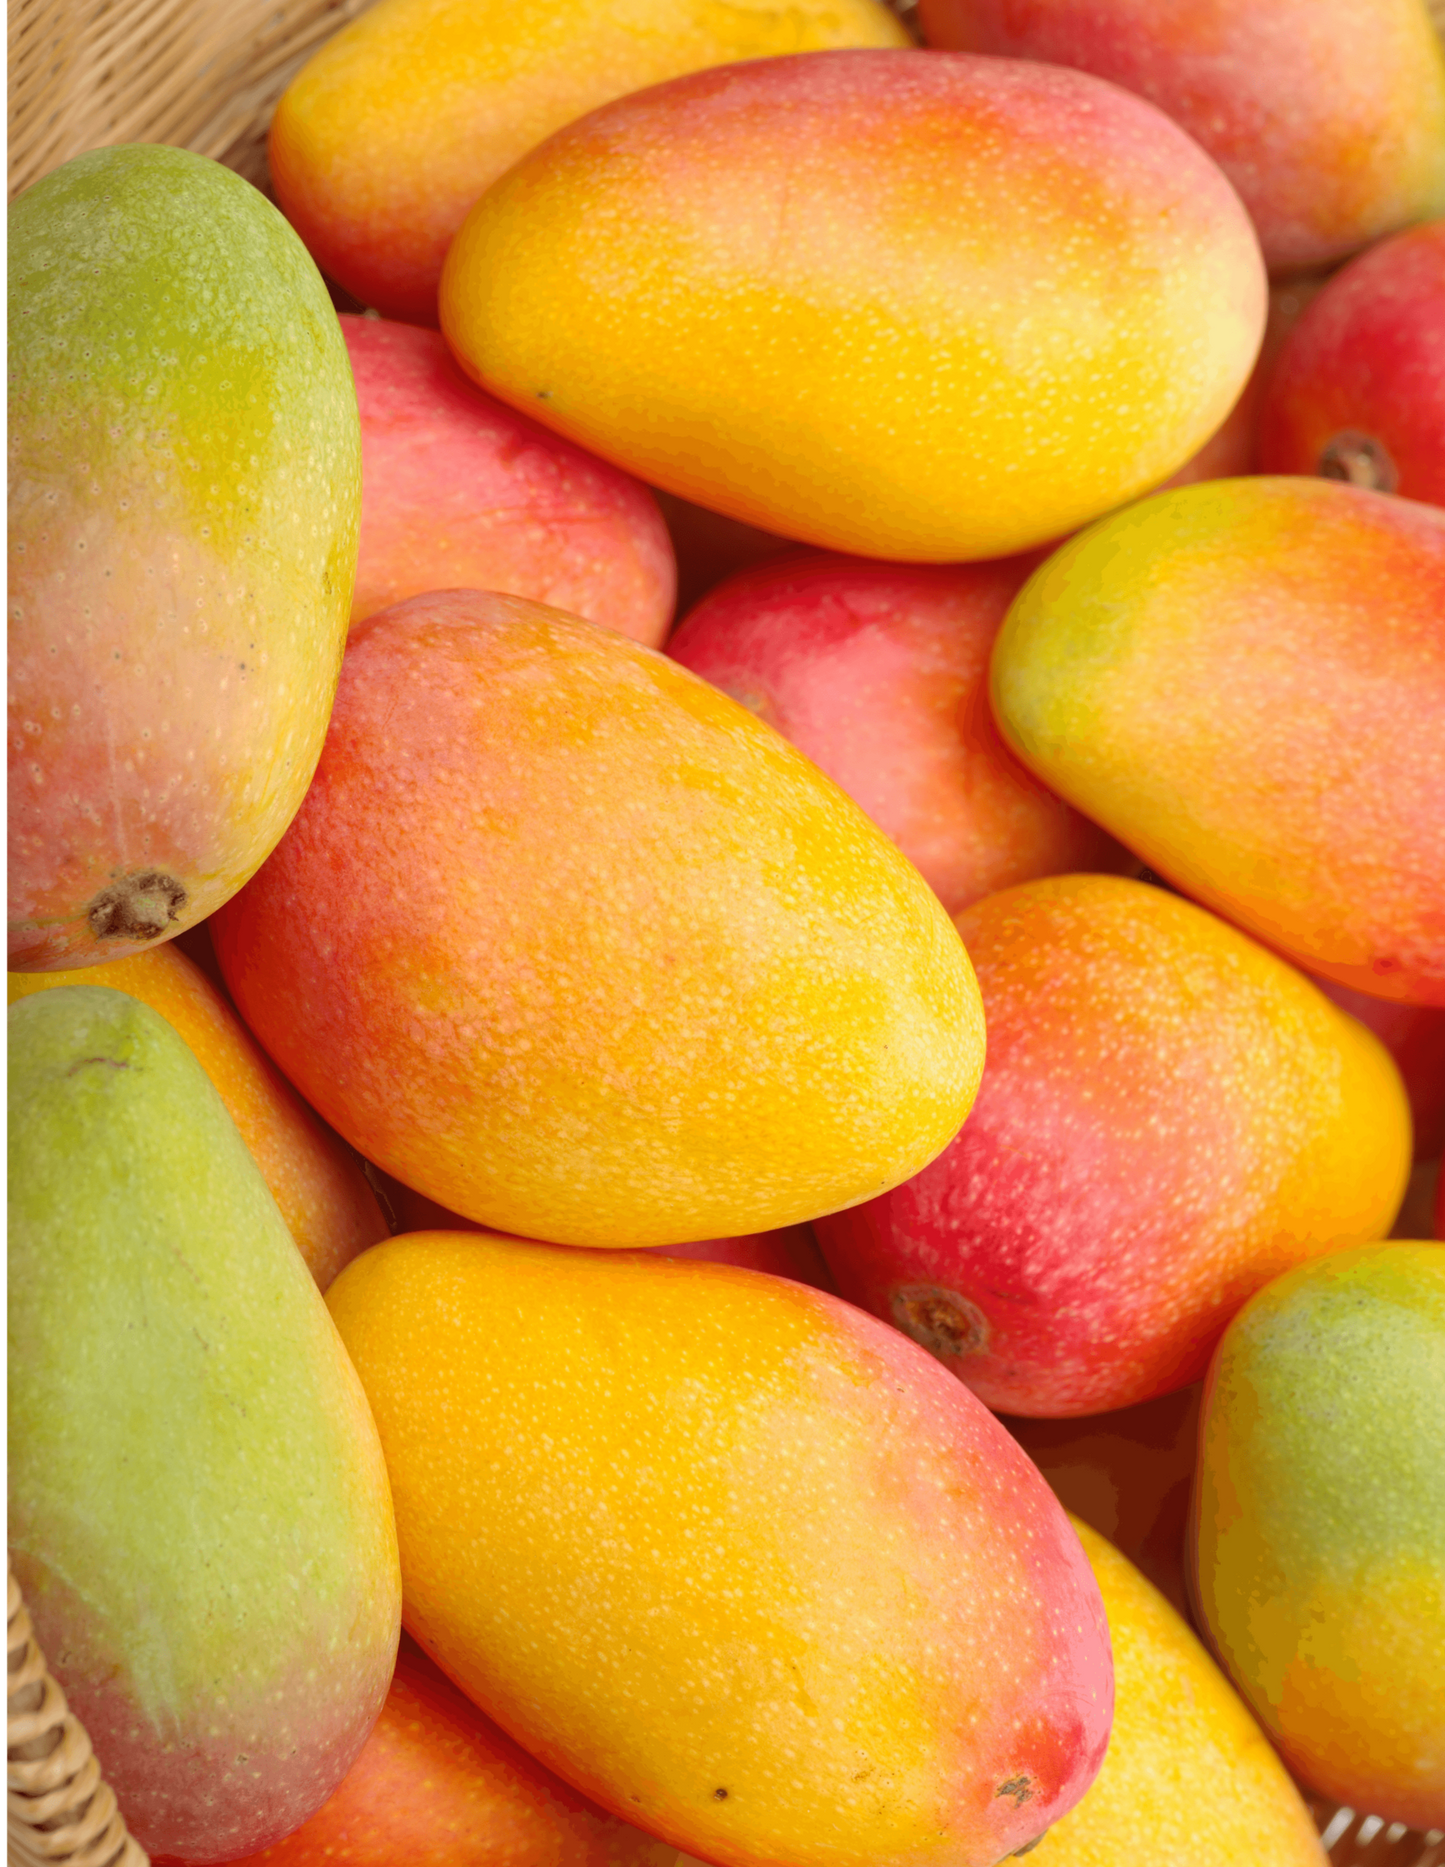 Imam pasand (or) King of mangoes (A1++King Size) - (900+ grams Each) 6pcs